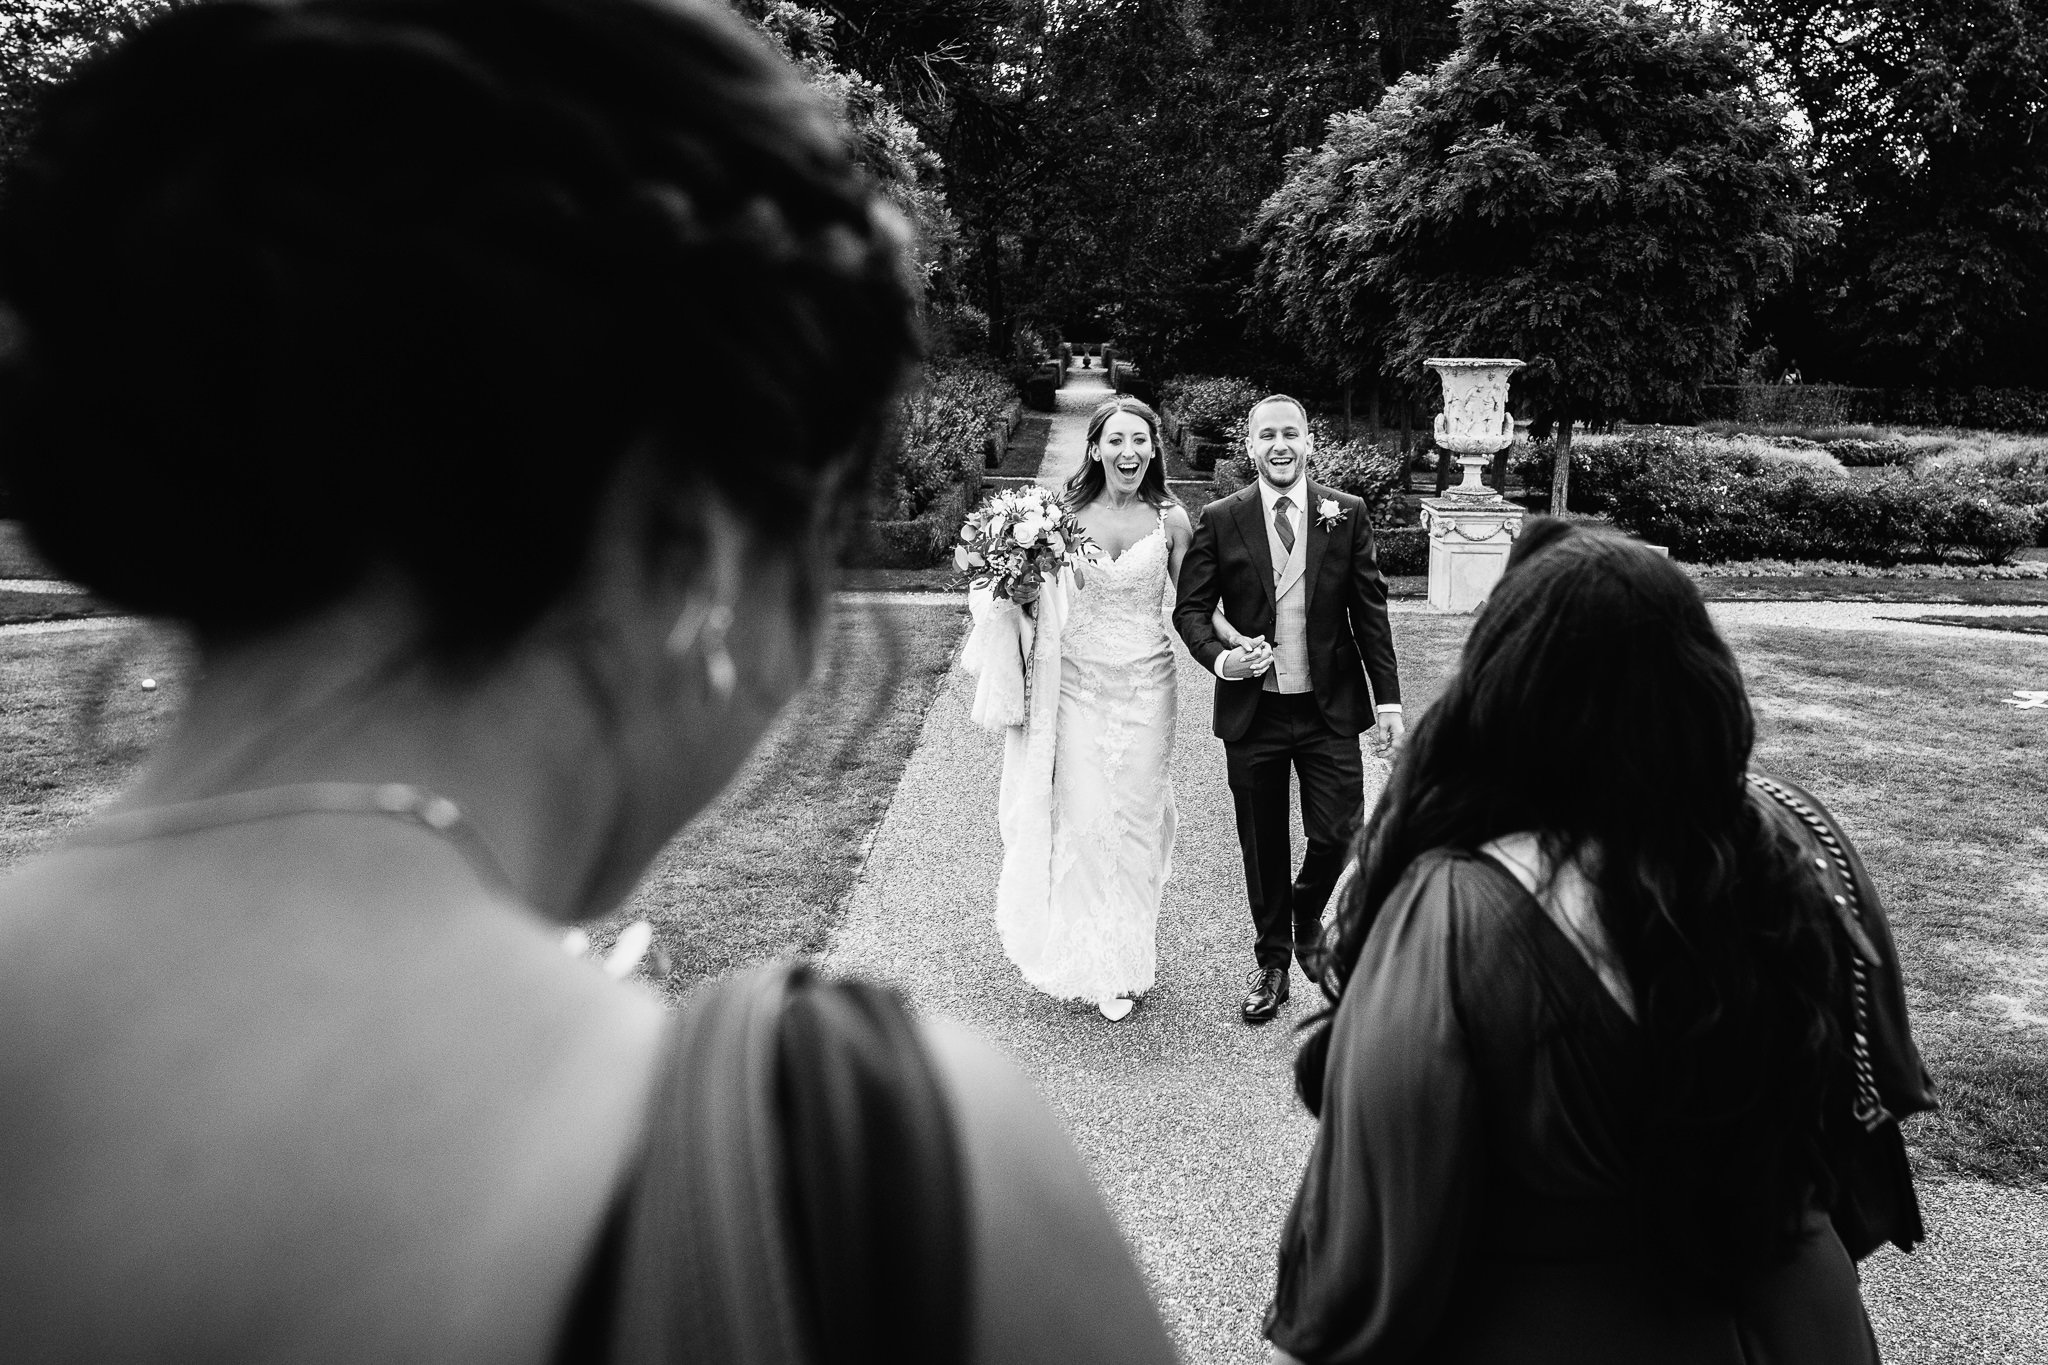  Bride and Groom look elated to see their friends 